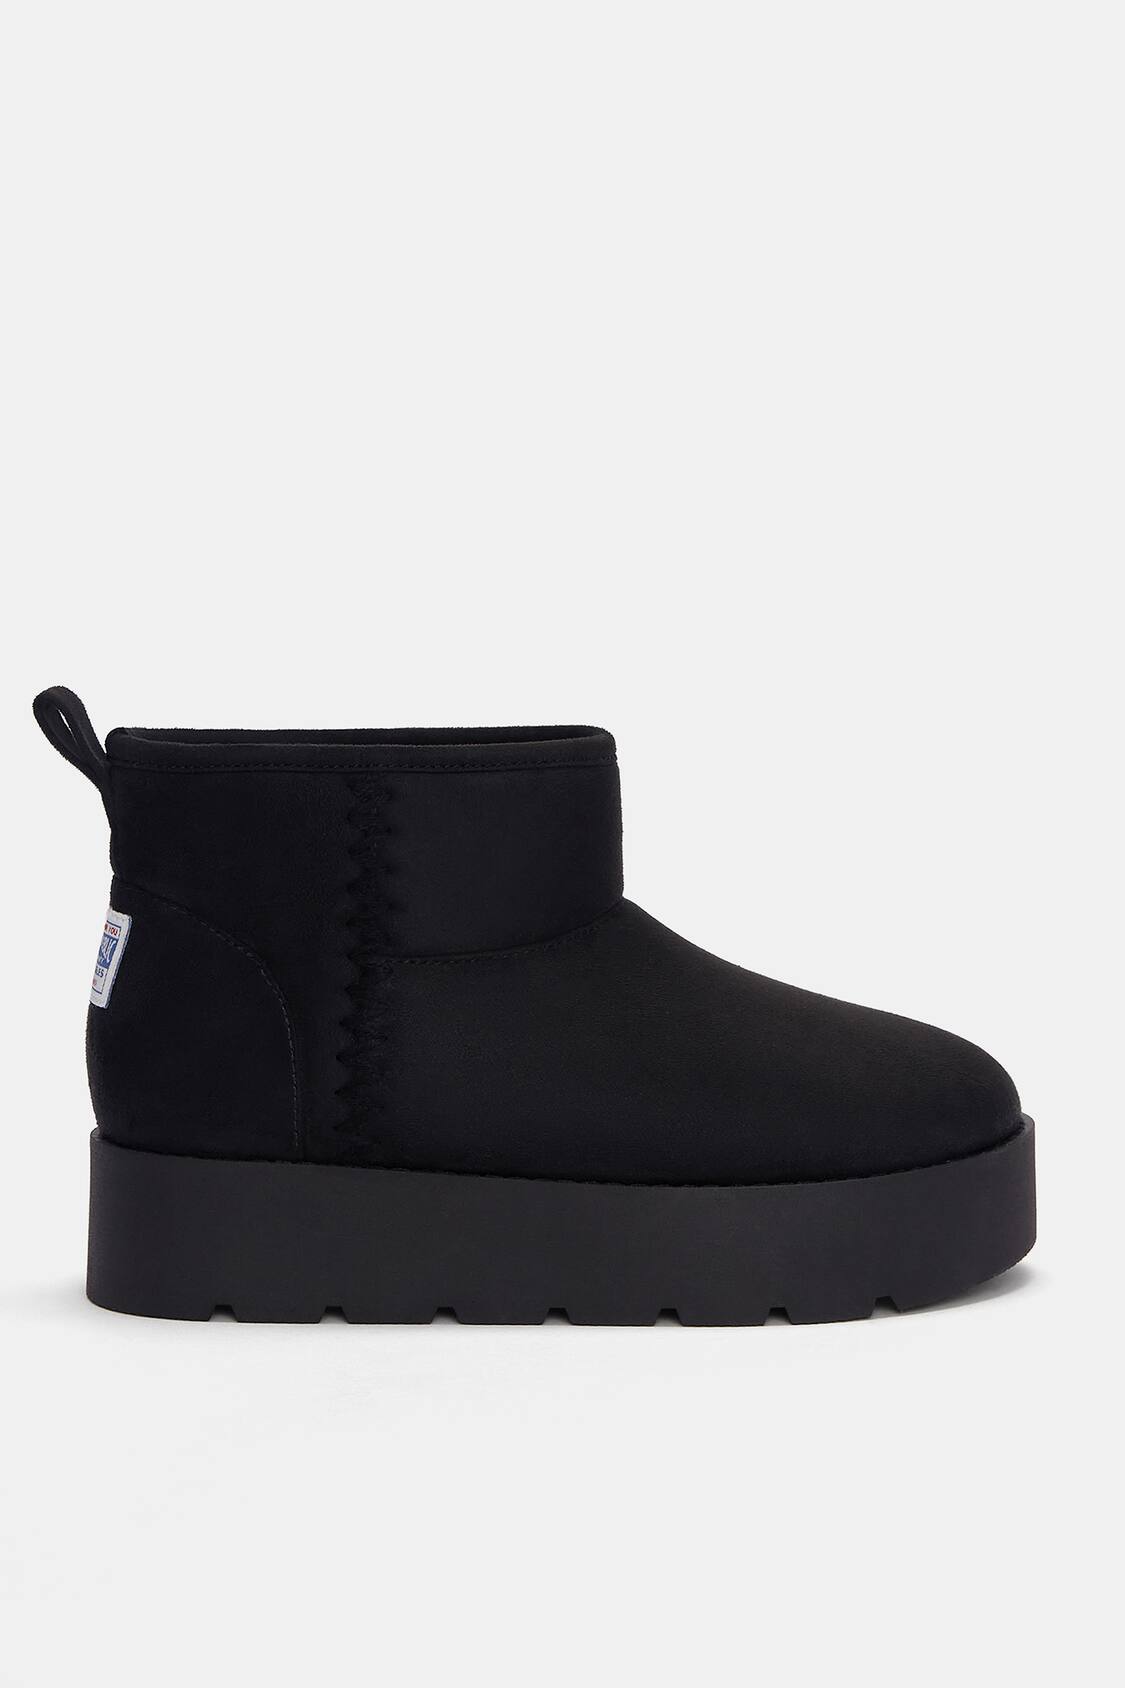 Pull&Bear Women's Flat Stretch Ankle Boots